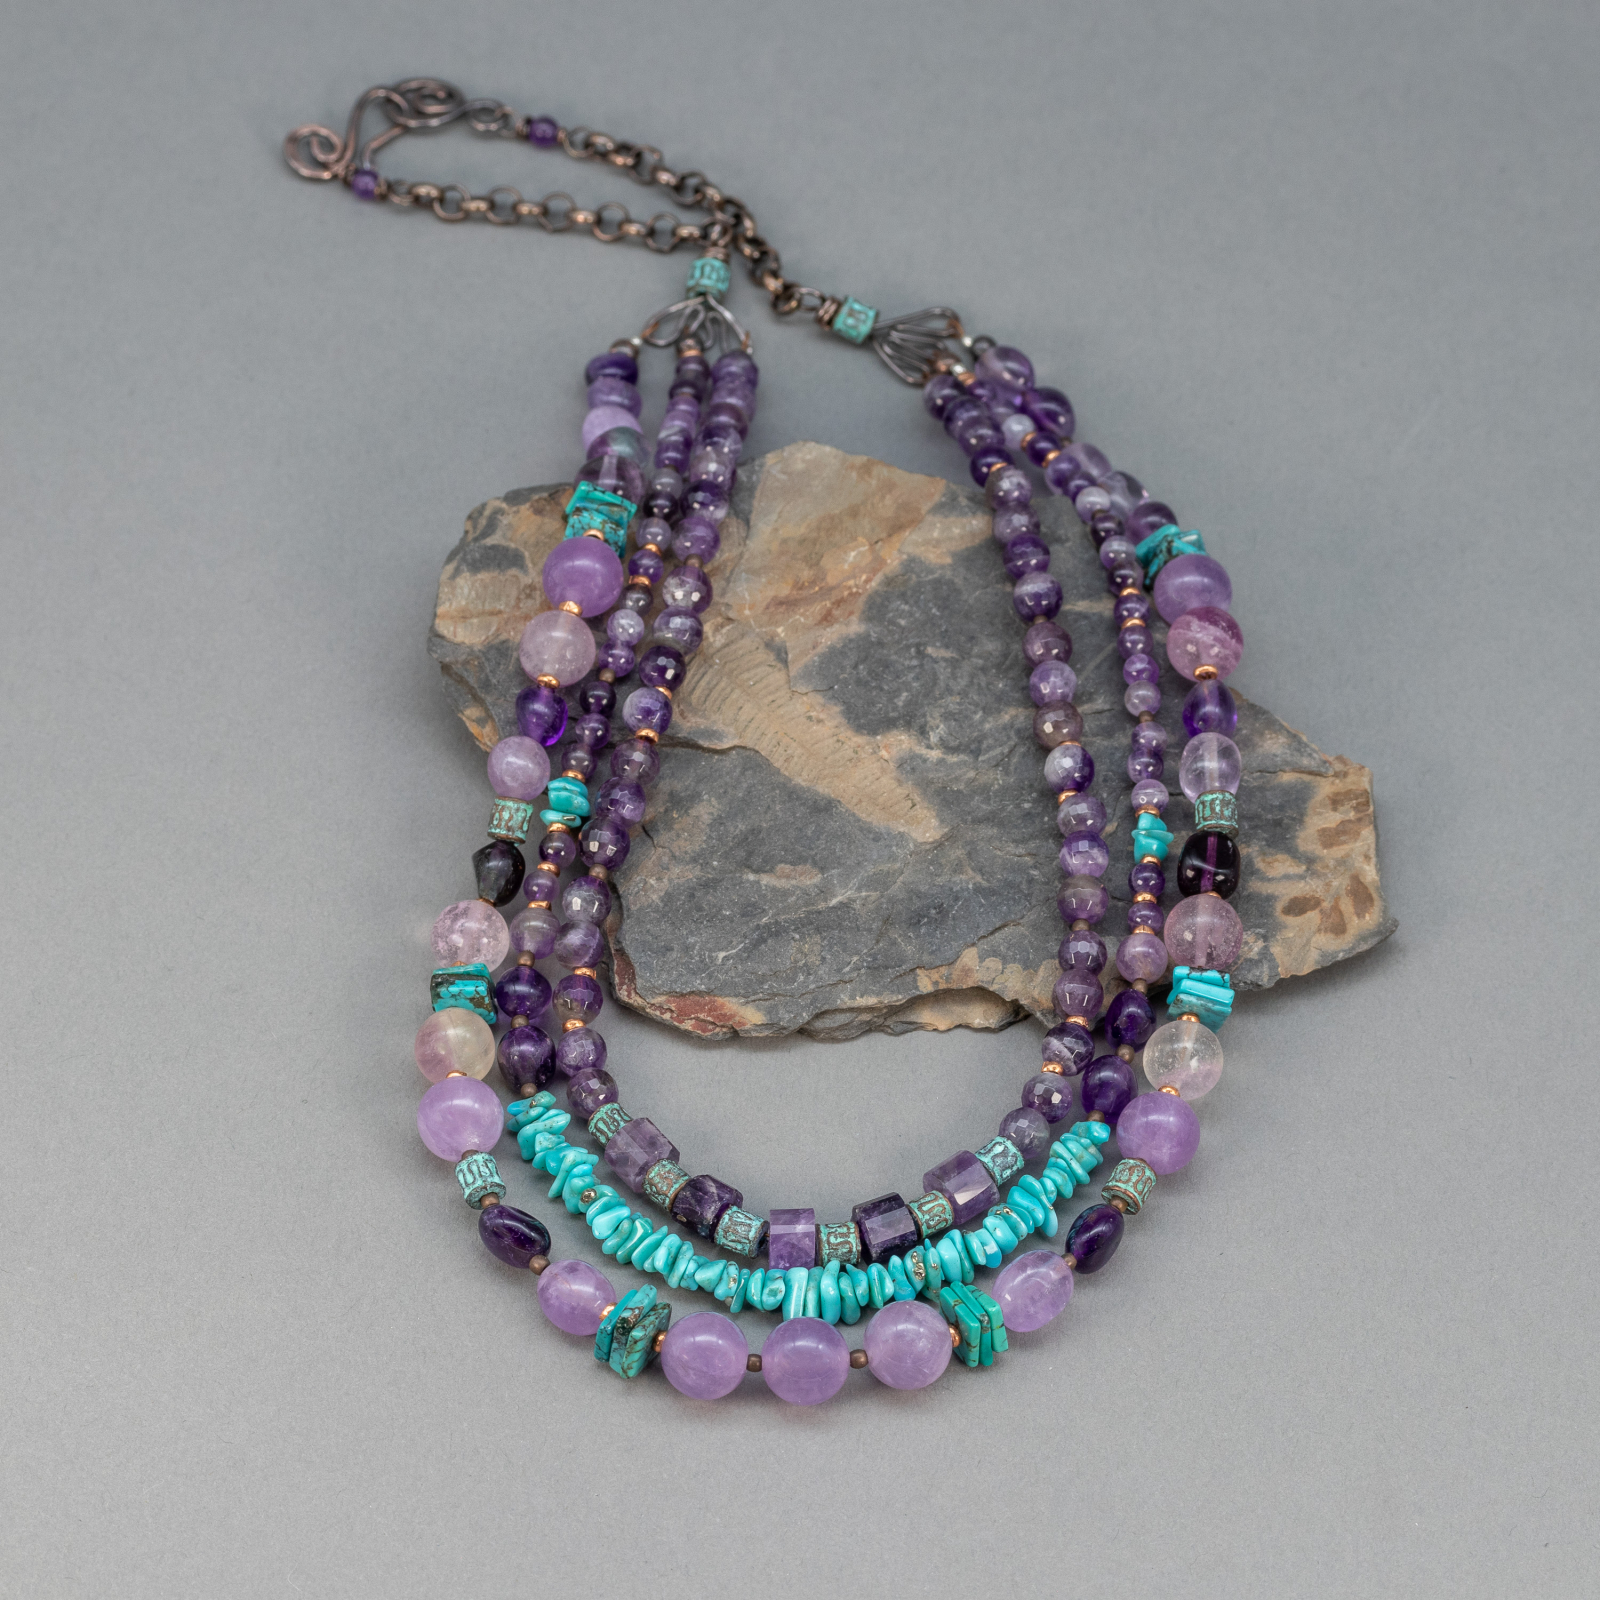 Beaded Gemstone Necklace and Earrings Set, Fluorite Amethyst and Genuine  Turquoise Natural Stones